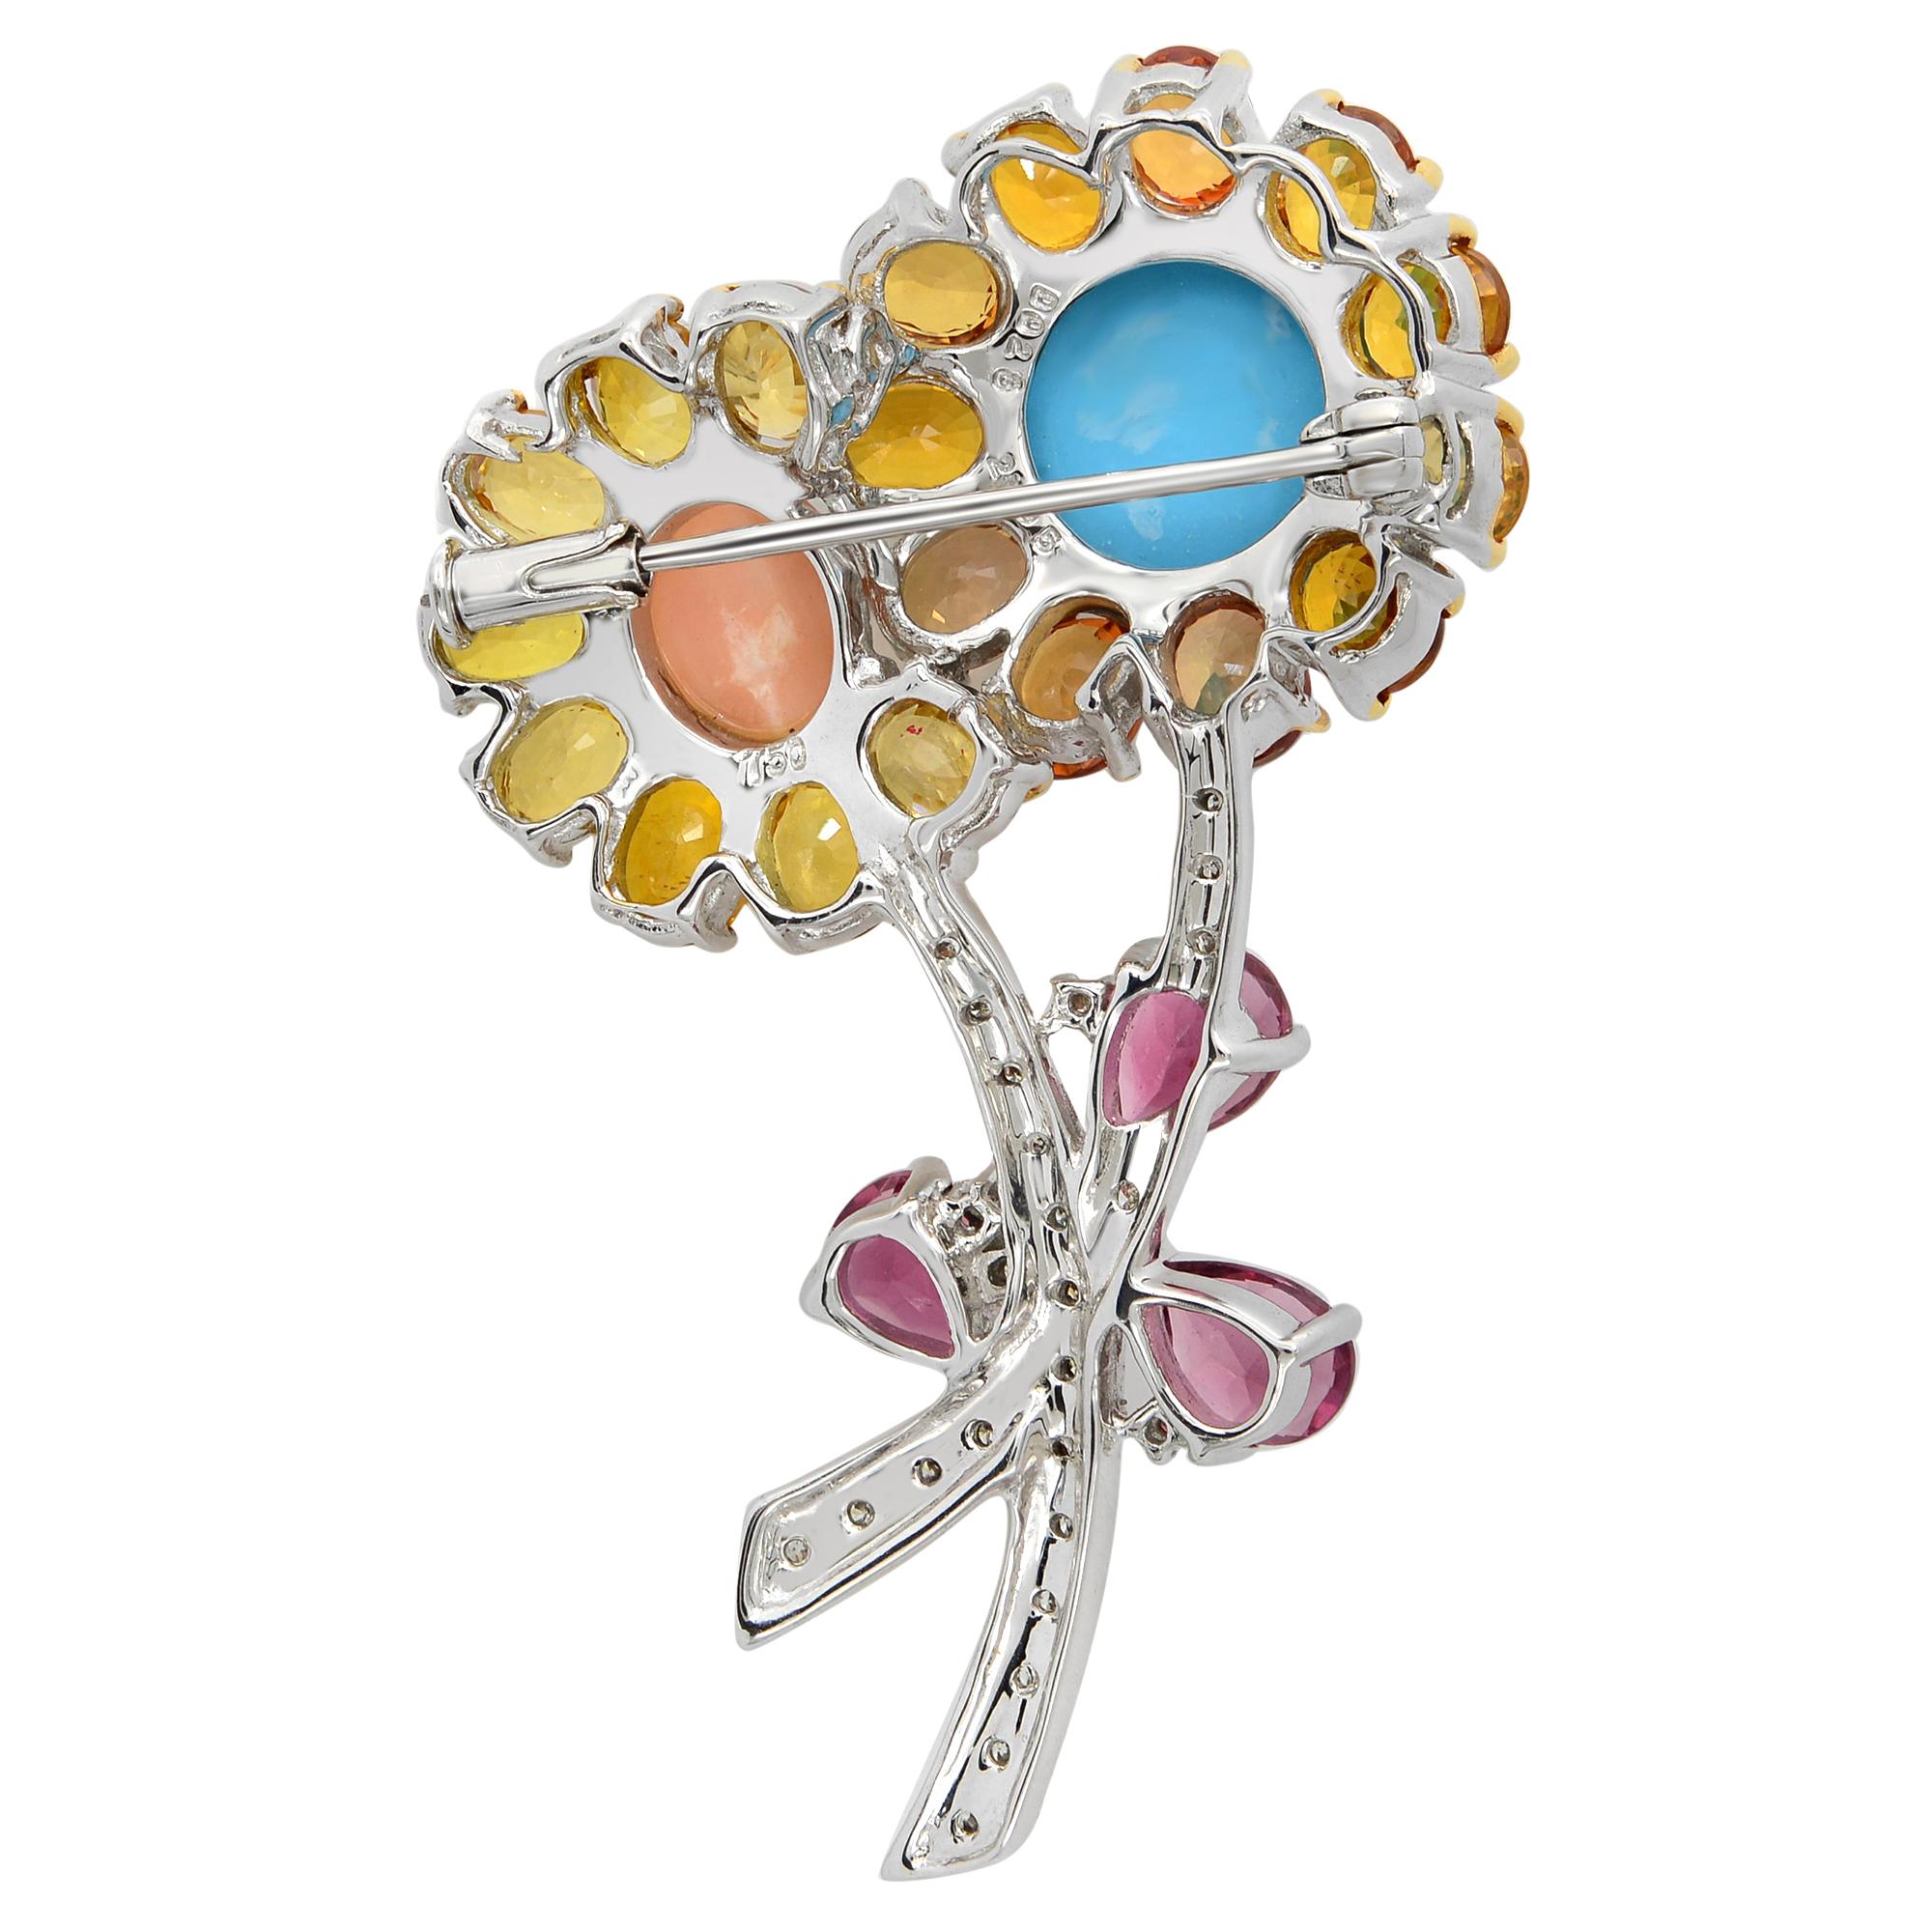 Spring has eternally sprung in this bright and colorful flower brooch. The 18 karat white gold stems blossom with shimmering pave diamonds, centered with coral and turquoise surrounded by yellow and orange citrines, that match with color sapphire